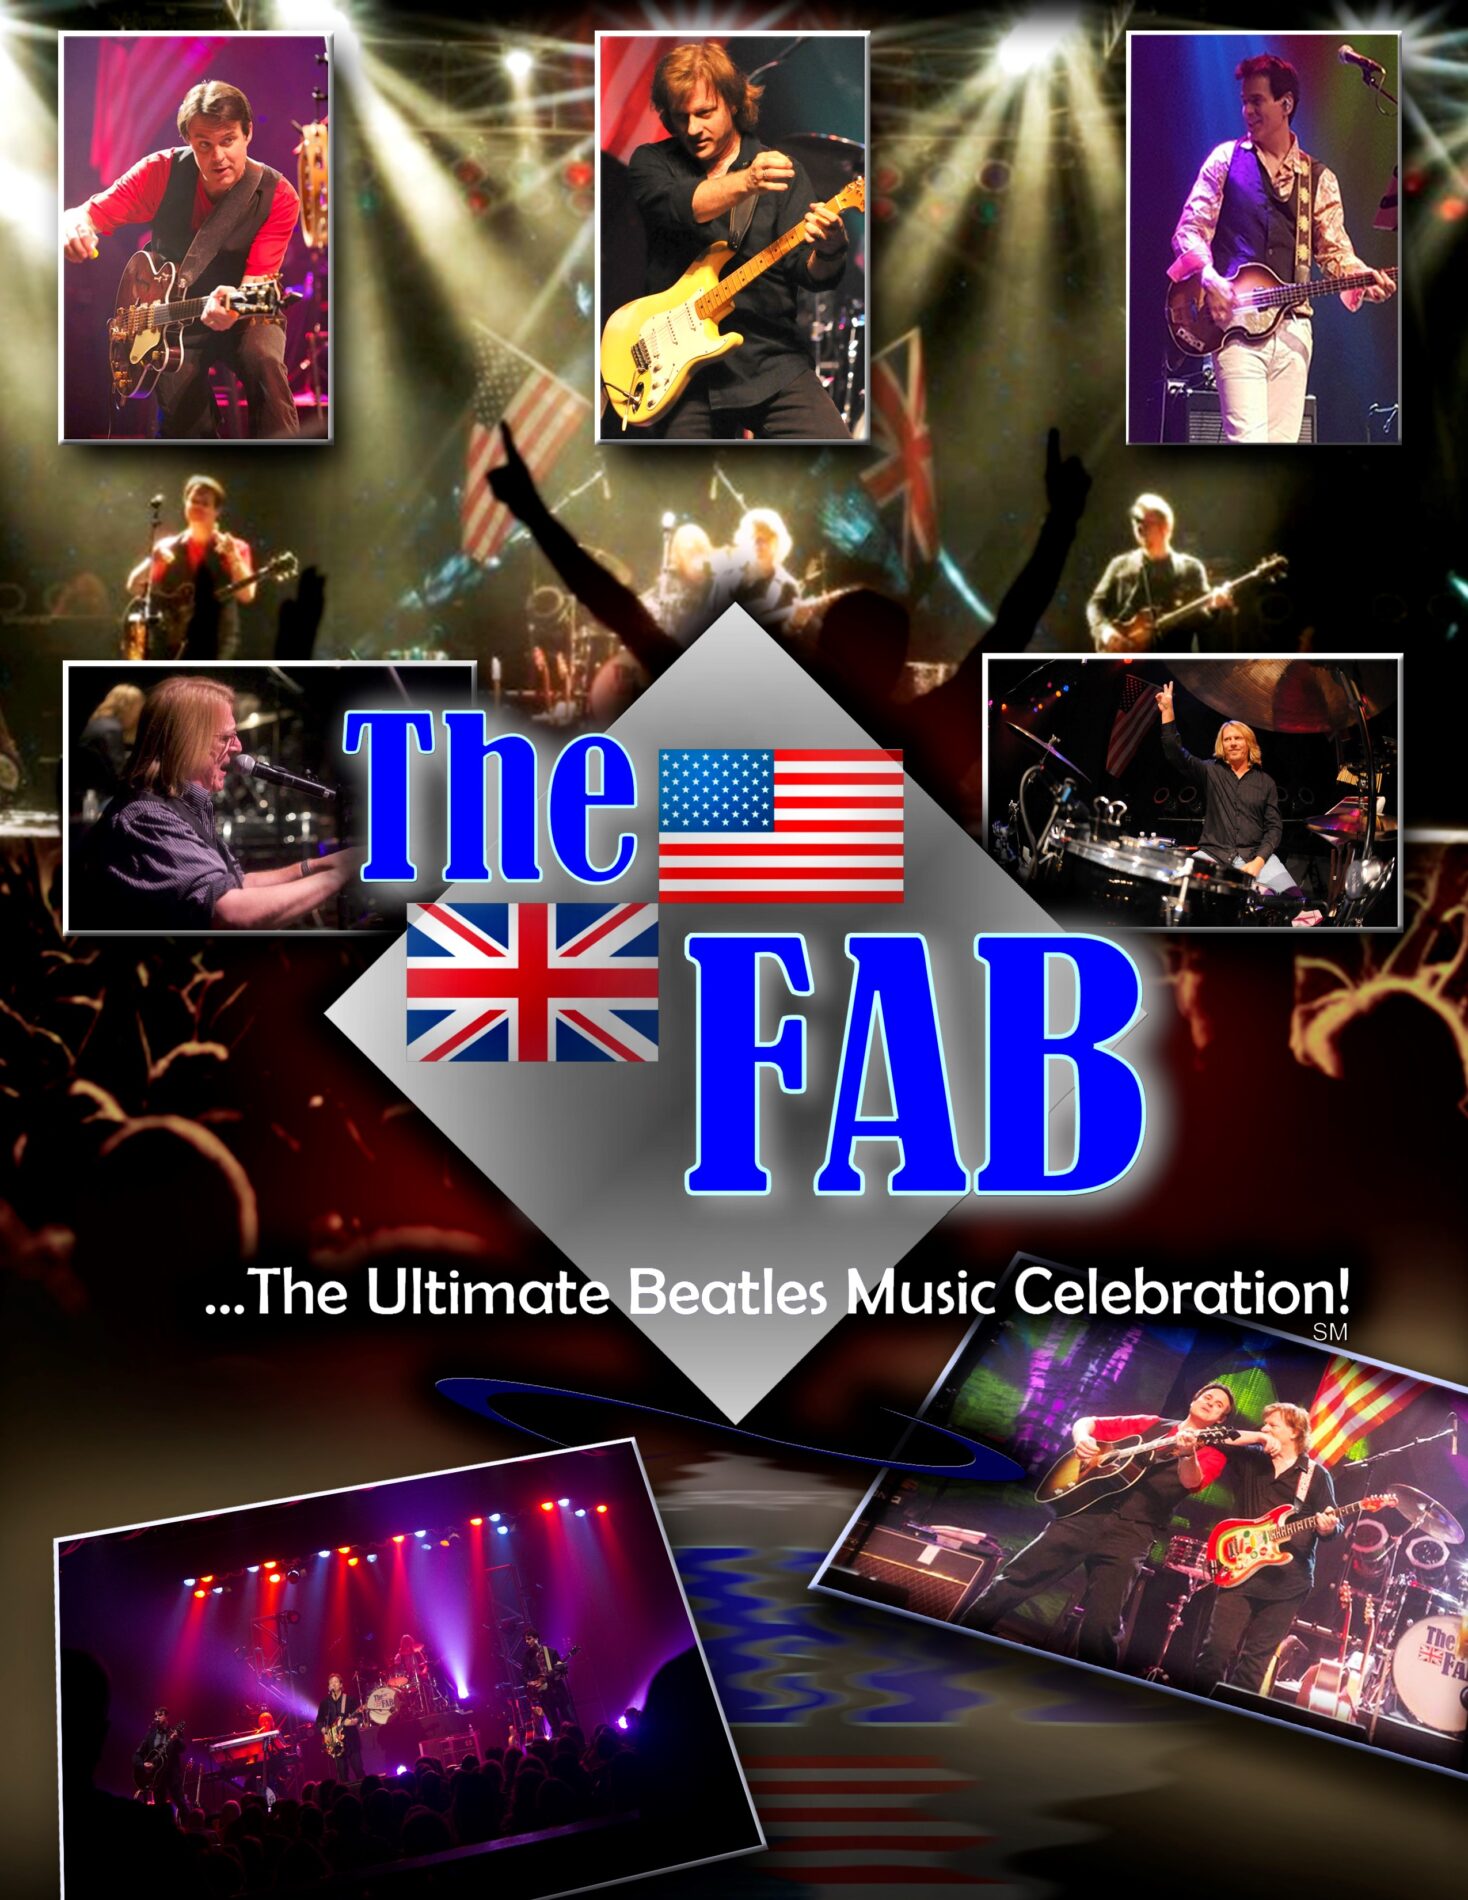 The Fab...The ultimate Beatles music celebration!